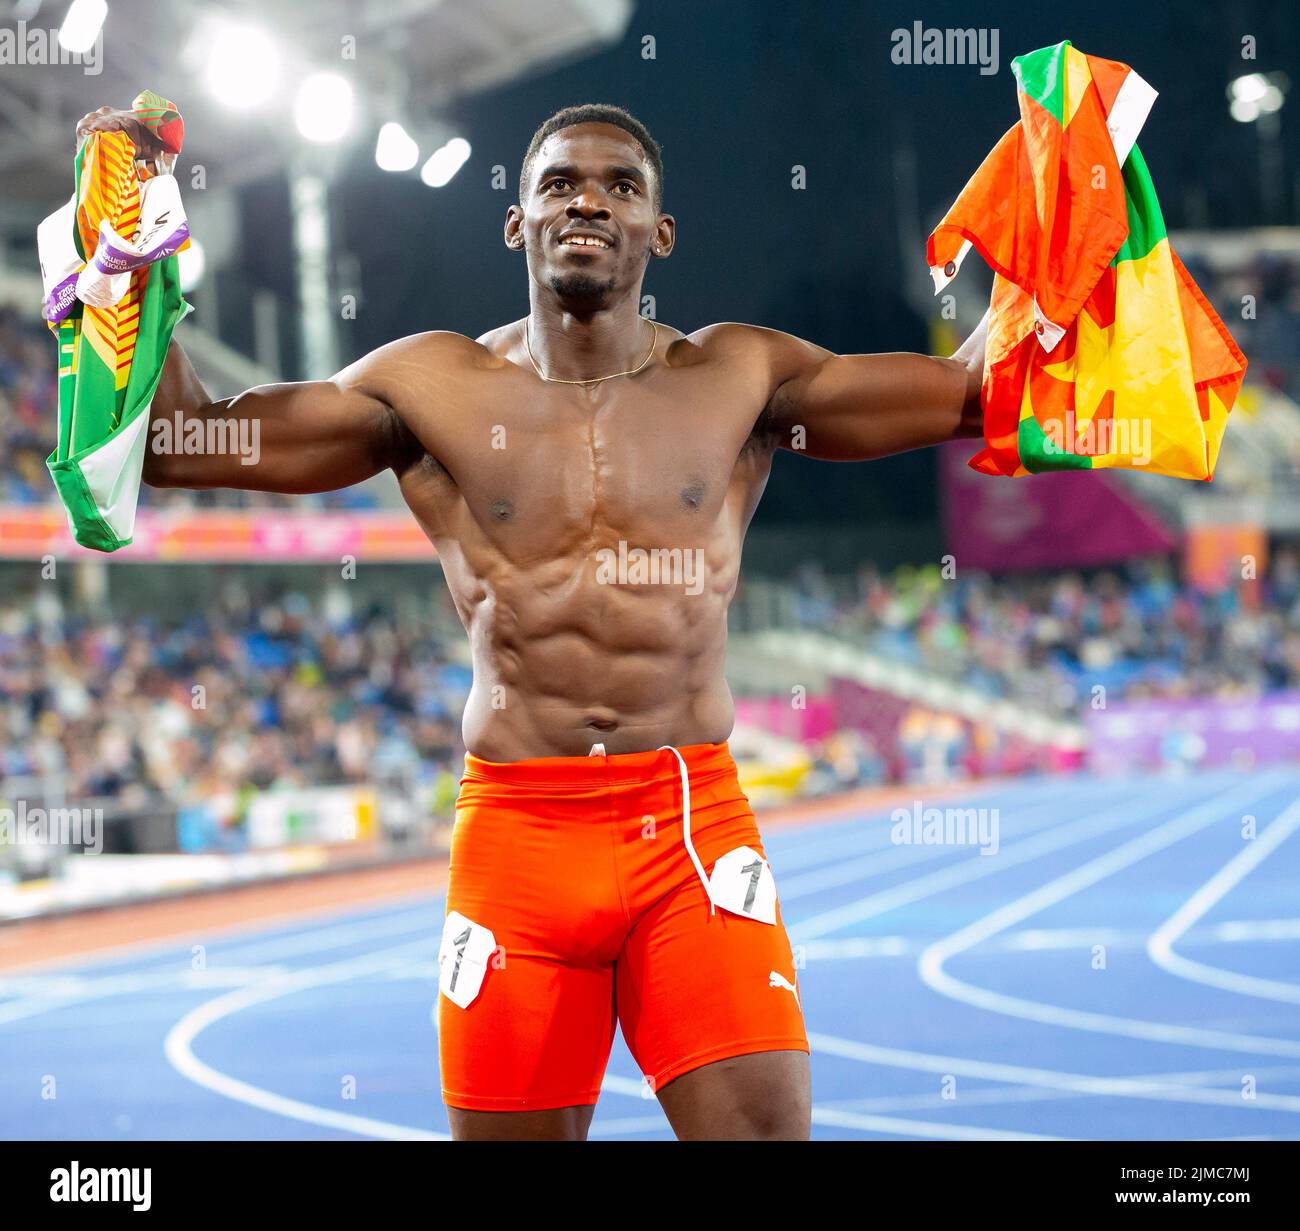 Birmingham, UK. 5th Aug 2022. 5th August 2022; Alexander Stadium, Birmingham, Midlands, England: Day 8 of the 2022 Commonwealth Games: Lindon Victor (GRN) with his national flag and shirtless after winning the Gold Medal in the Men's Decathlon Credit: Action Plus Sports Images/Alamy Live News Stock Photo